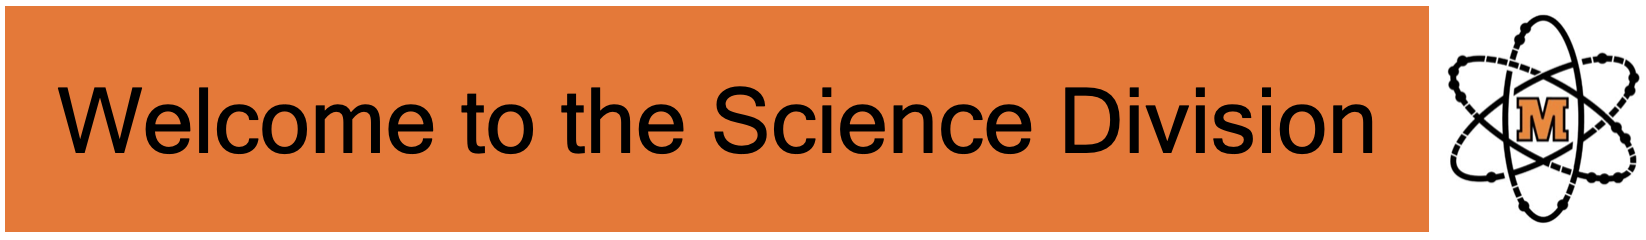 Science Division banner